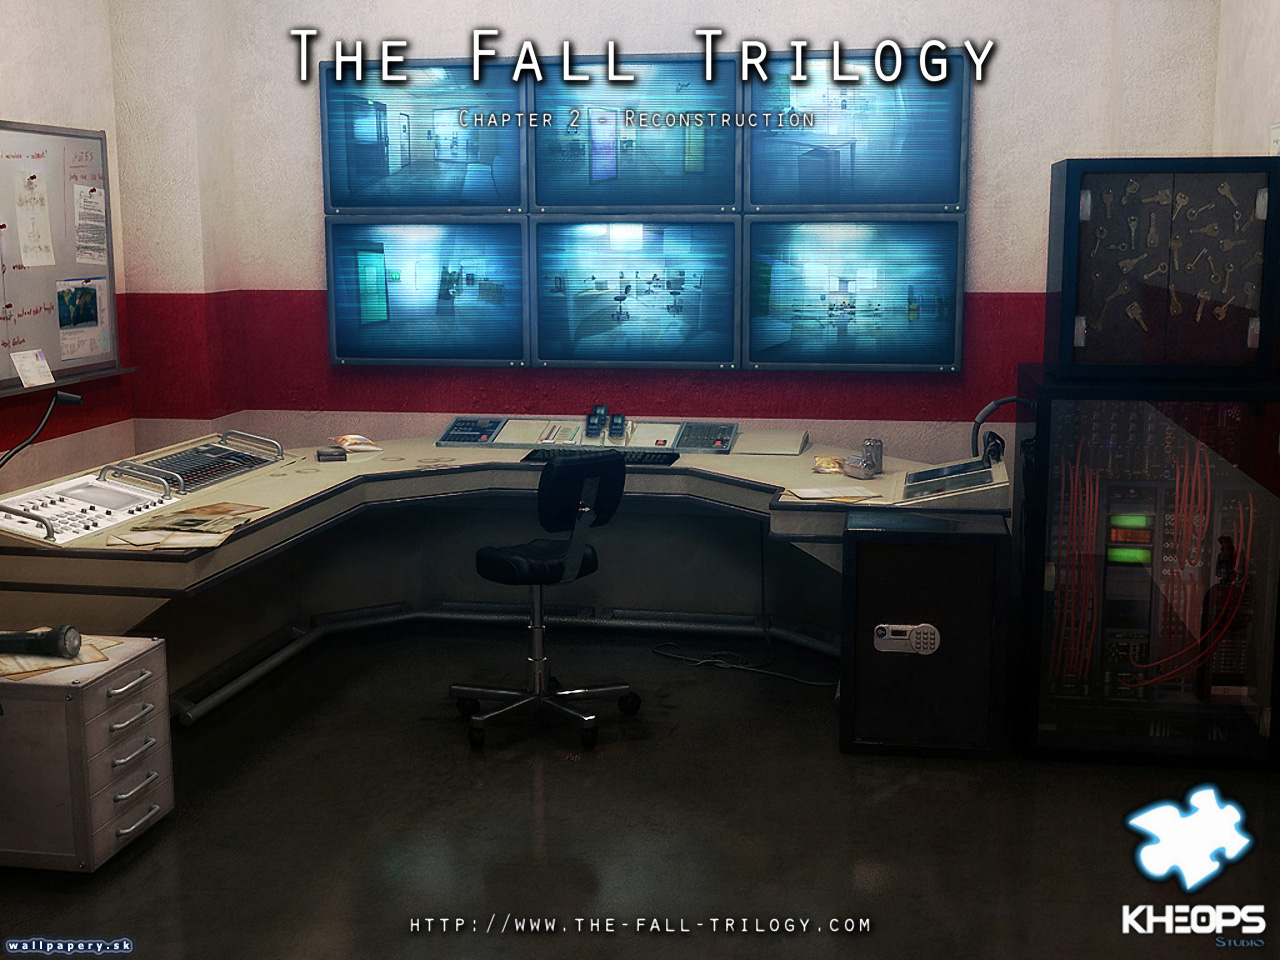 The Fall Trilogy - Chapter 2: Reconstruction - wallpaper 14